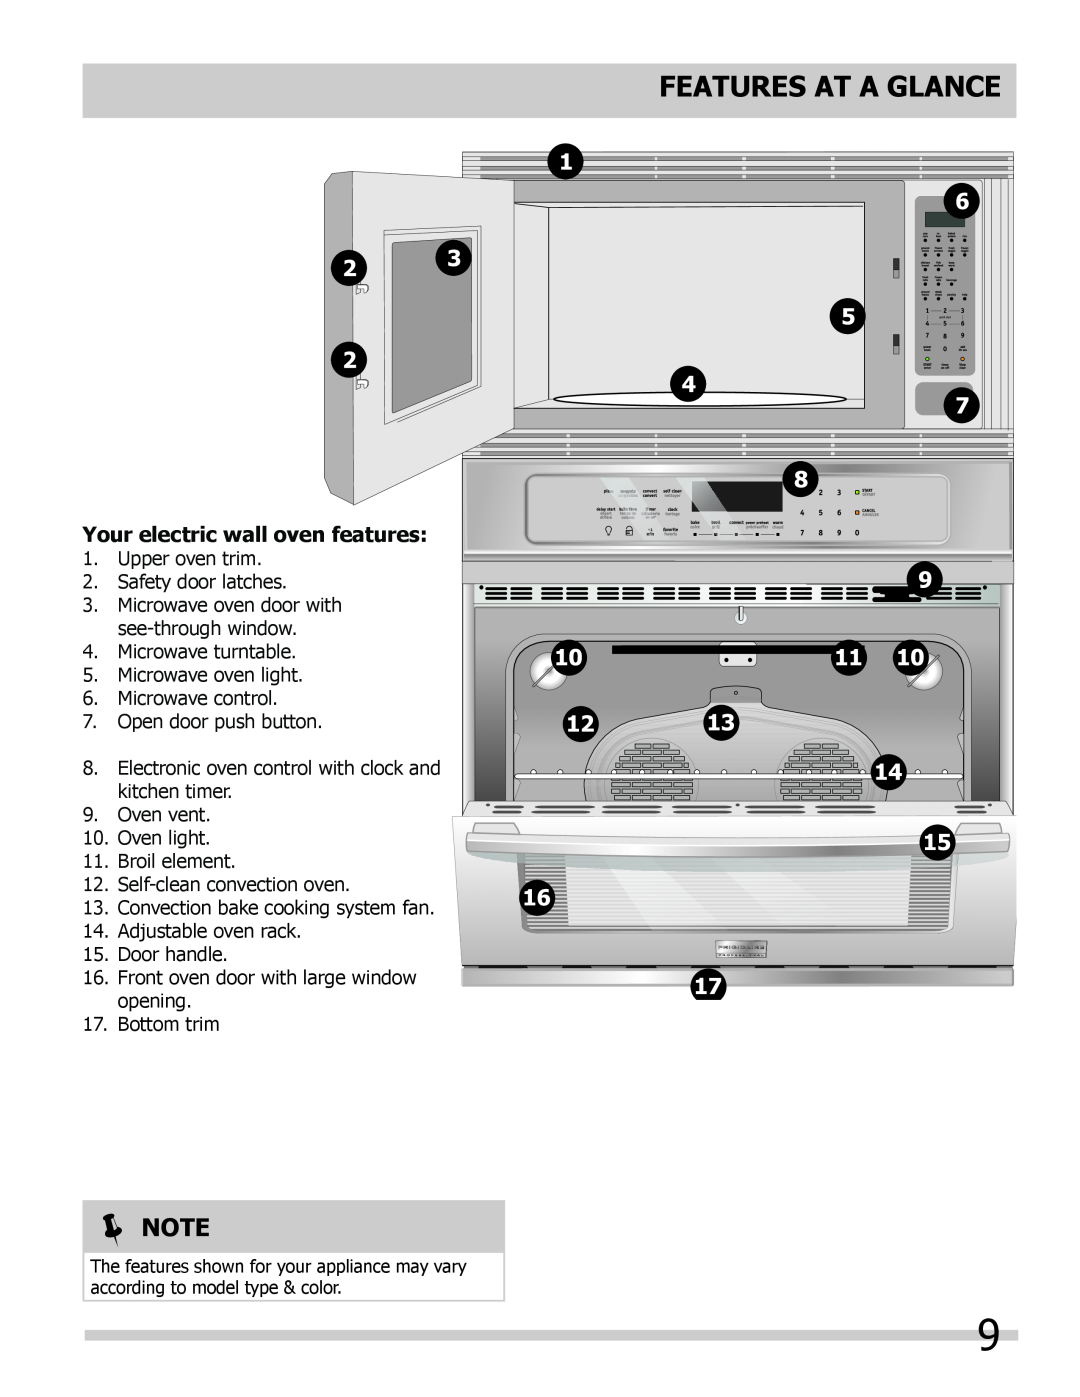 Frigidaire 318205300 important safety instructions Features At A Glance, Your electric wall oven features,  Note 